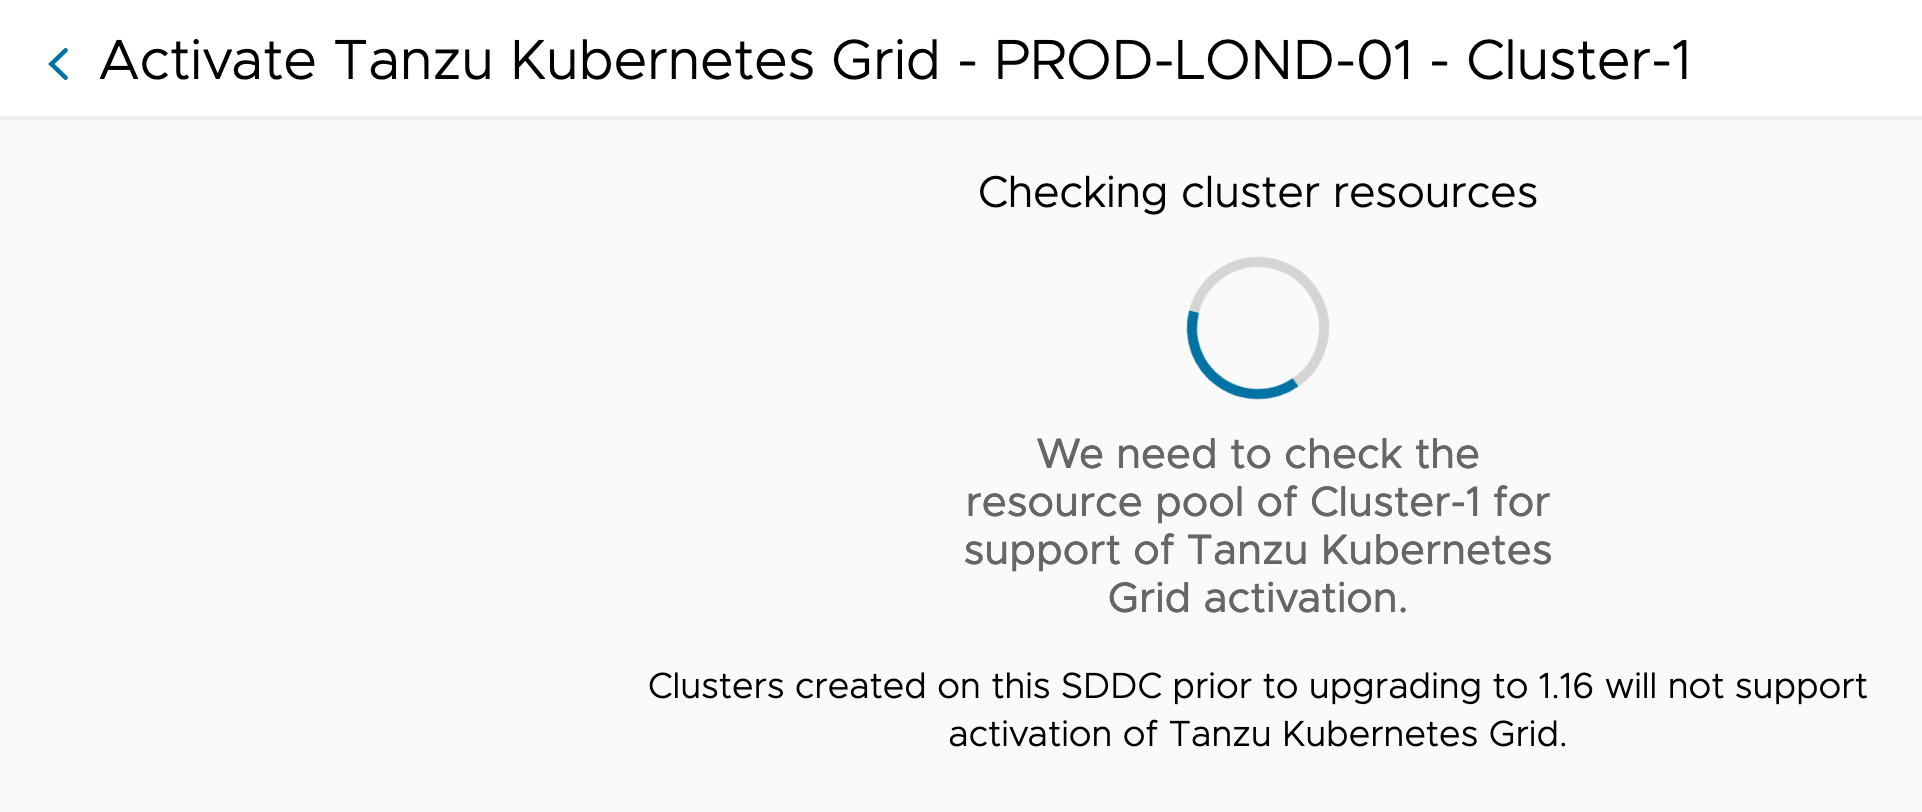 VMC - Inventory - SDDC - Activate Tanzu Kubernetes Grid - Checking cluster resources